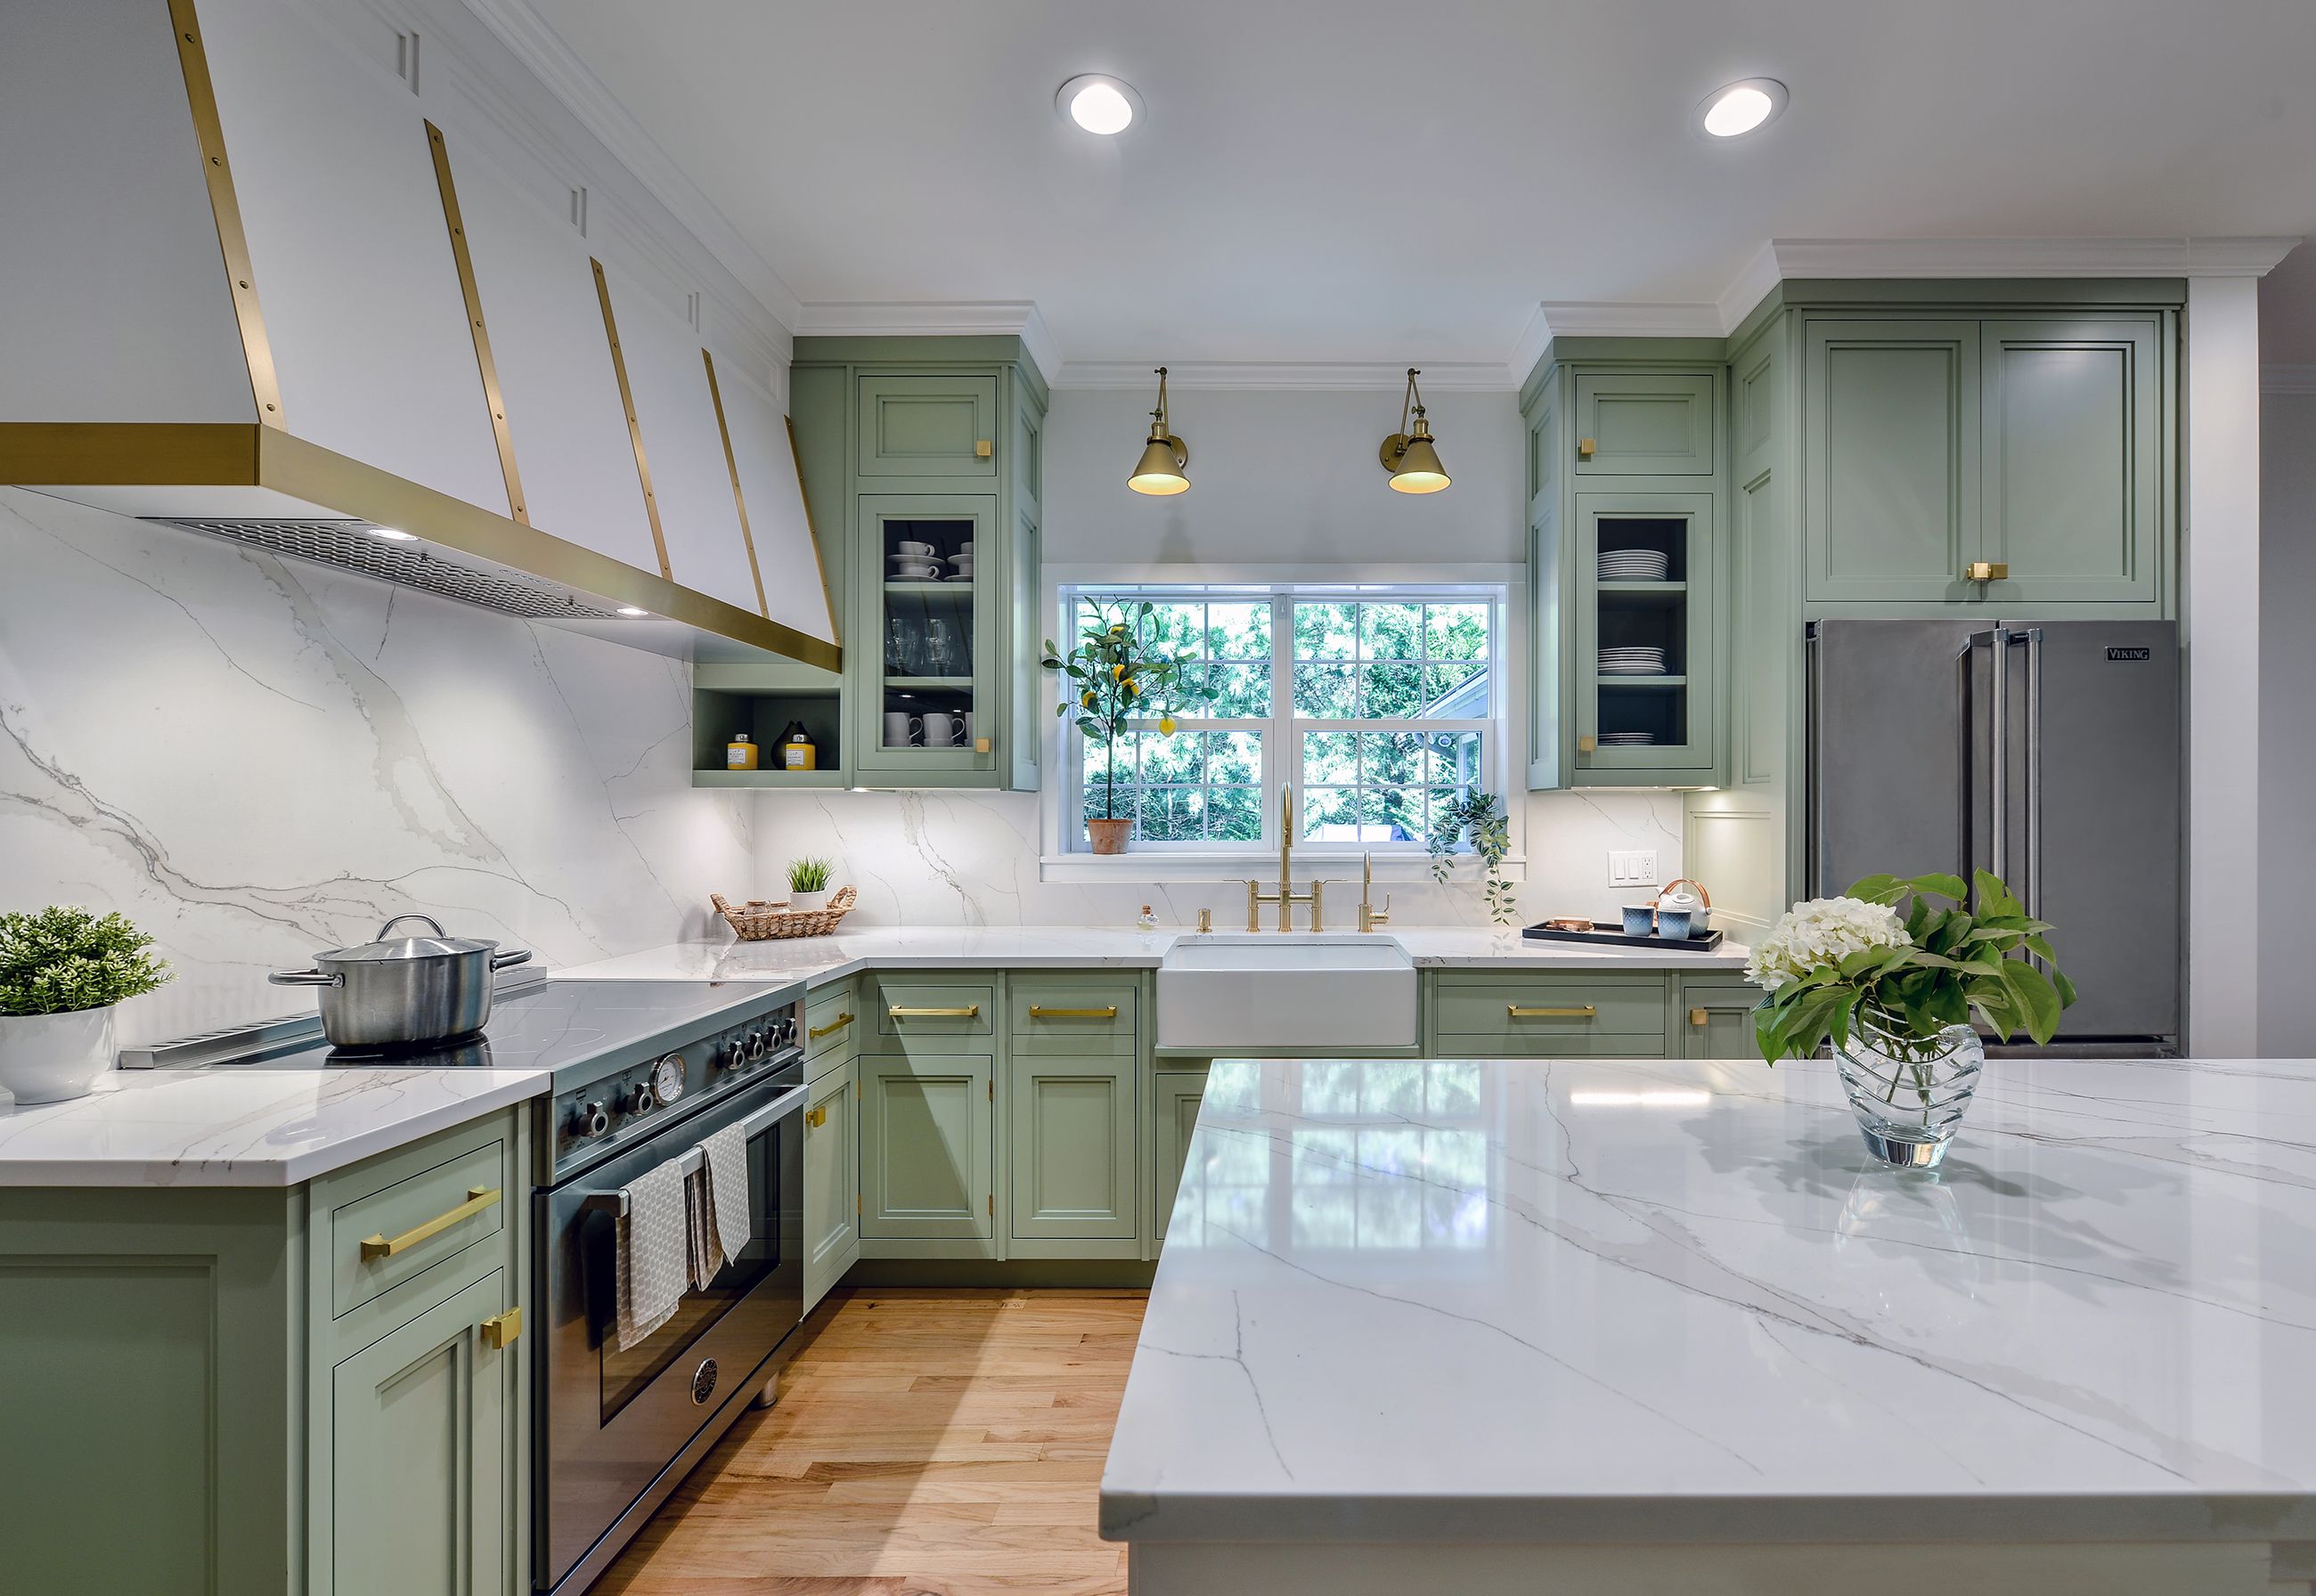 Are All-White Kitchens Over? The Popular Color Trend That's on the Rise